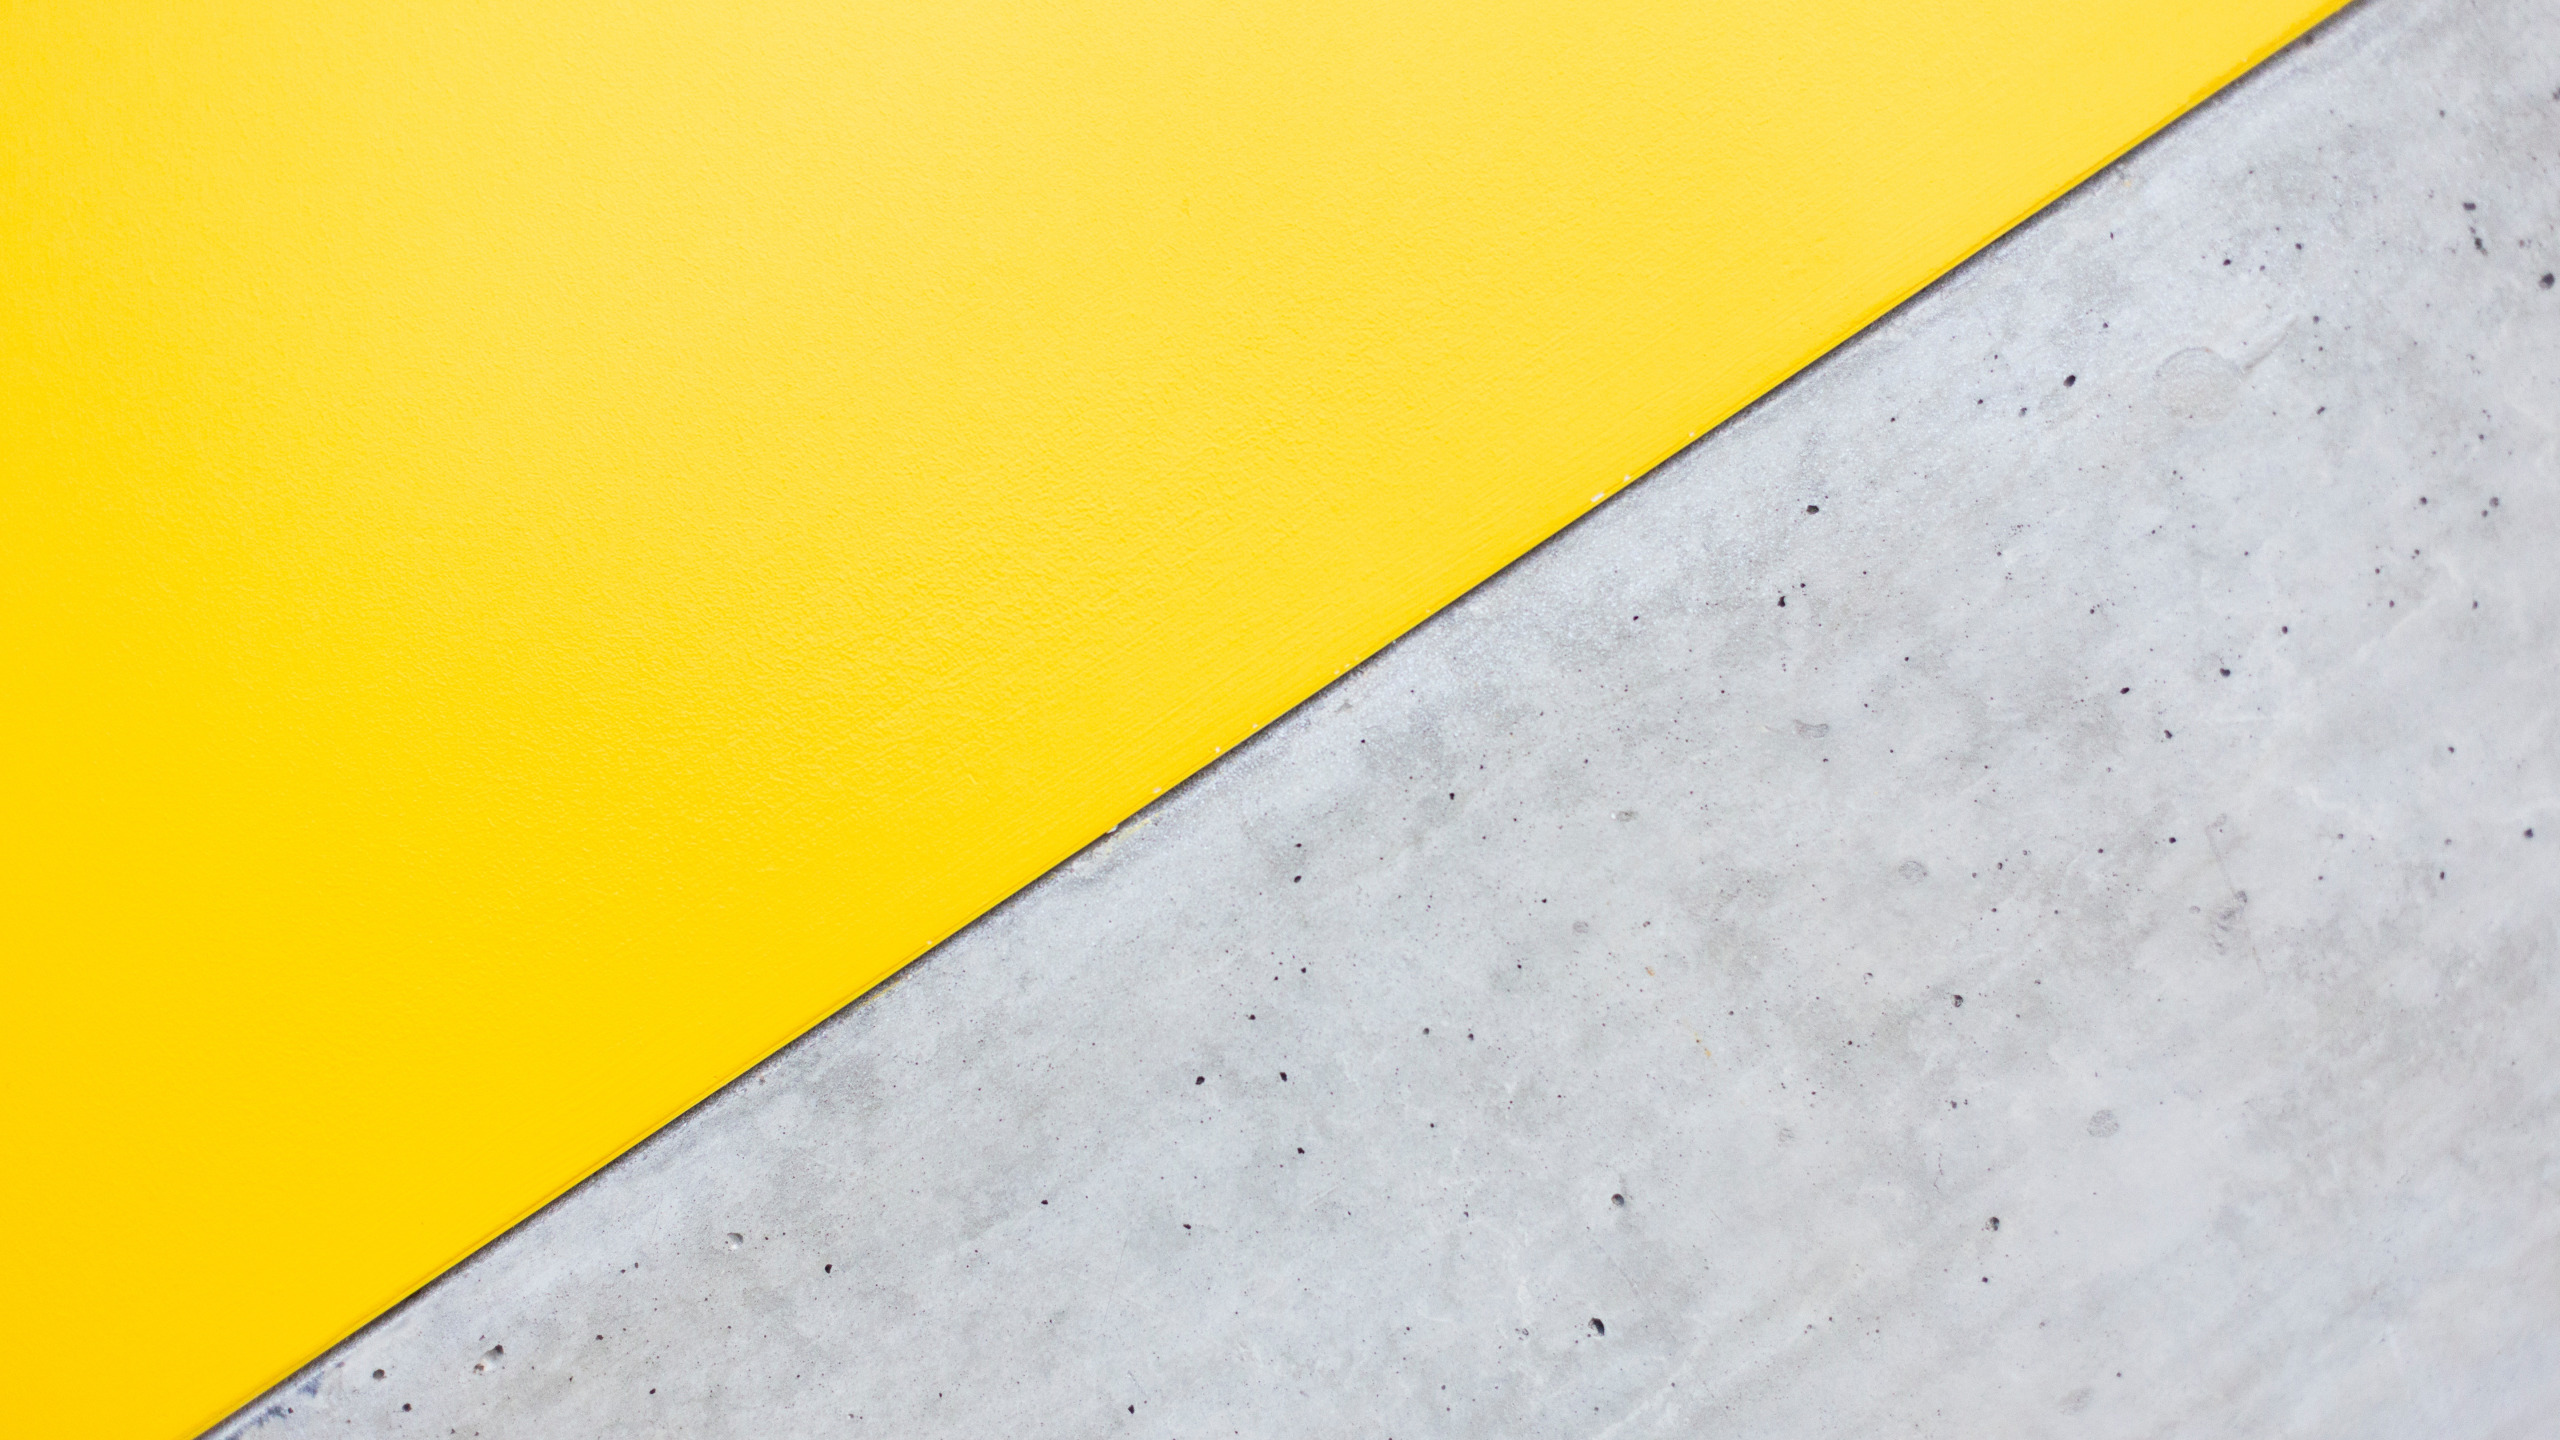 Download wallpaper surface, yellow, grey, background, section textures in  resolution 2560x1440